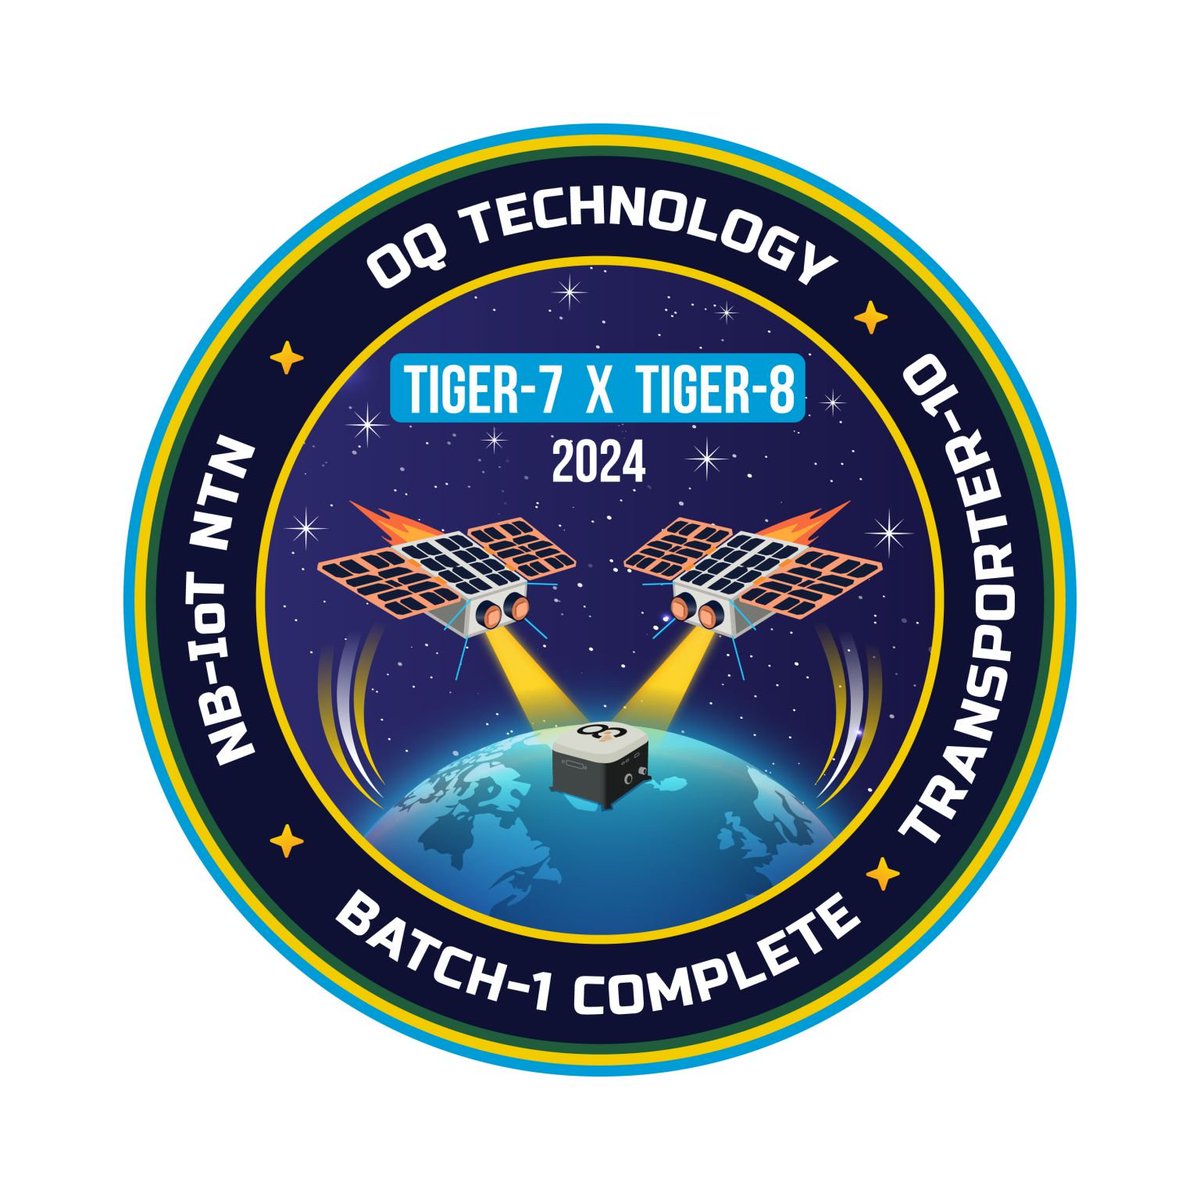 OQ Technology Group is counting down to another exciting launch!

We will be riding with the upcoming SpaceX's Transporter10 mission, with two satellites (Tiger7 & Tiger8) which will provide global 5G NBIoT NTN connectivity for machines and IoT.

⬇️More info in the comments.